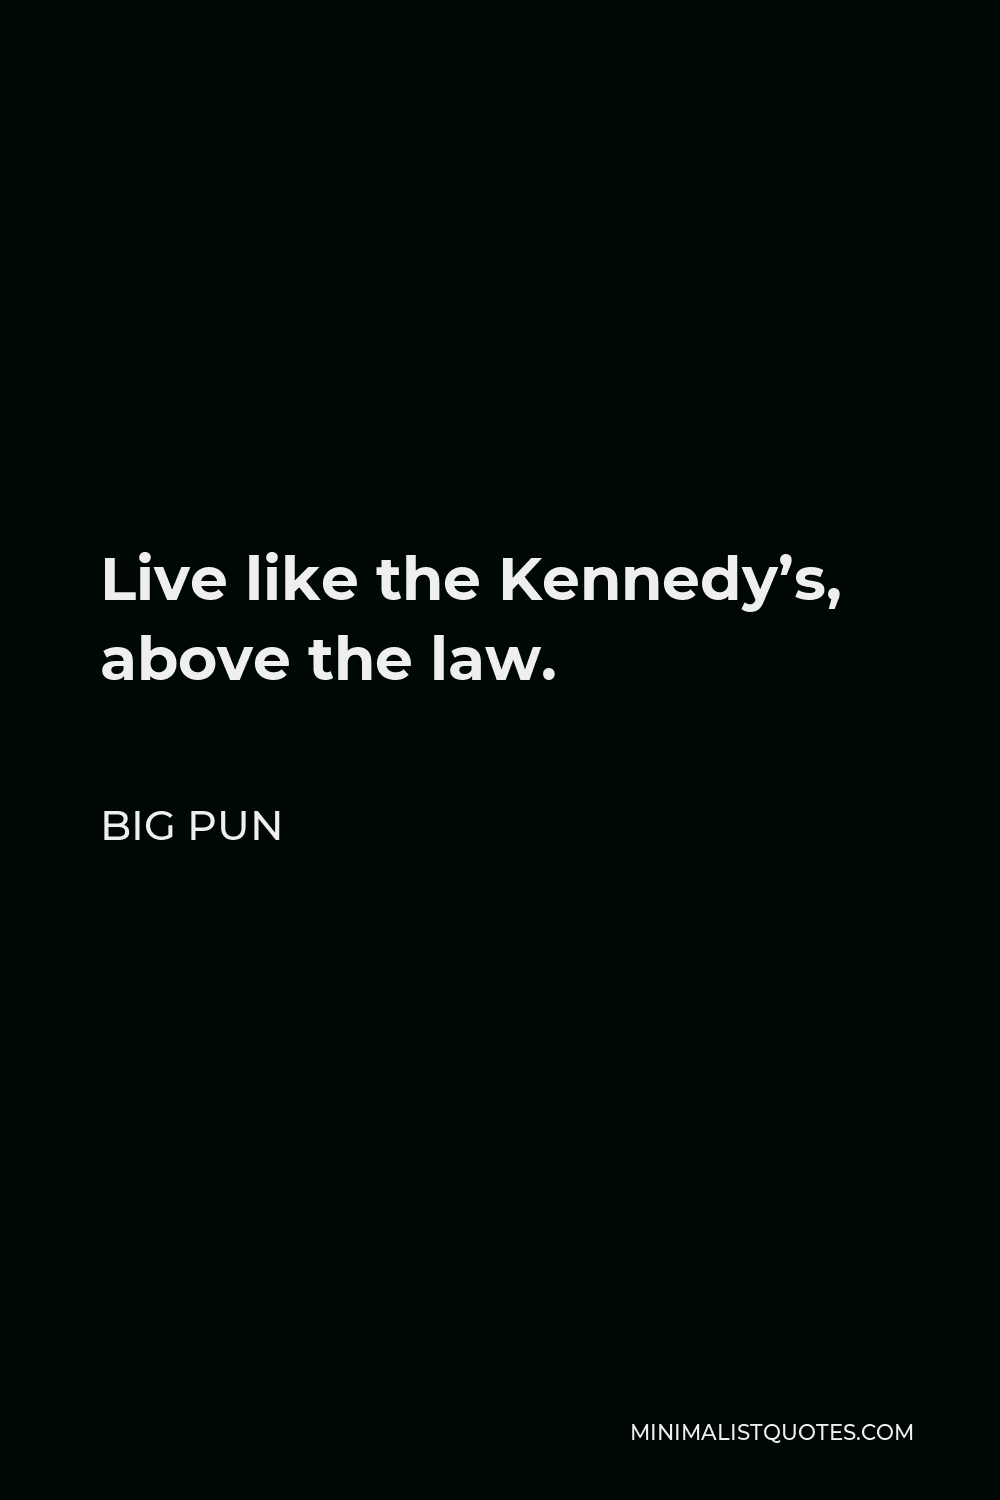 Big Pun Quote - Live like the Kennedy’s, above the law.